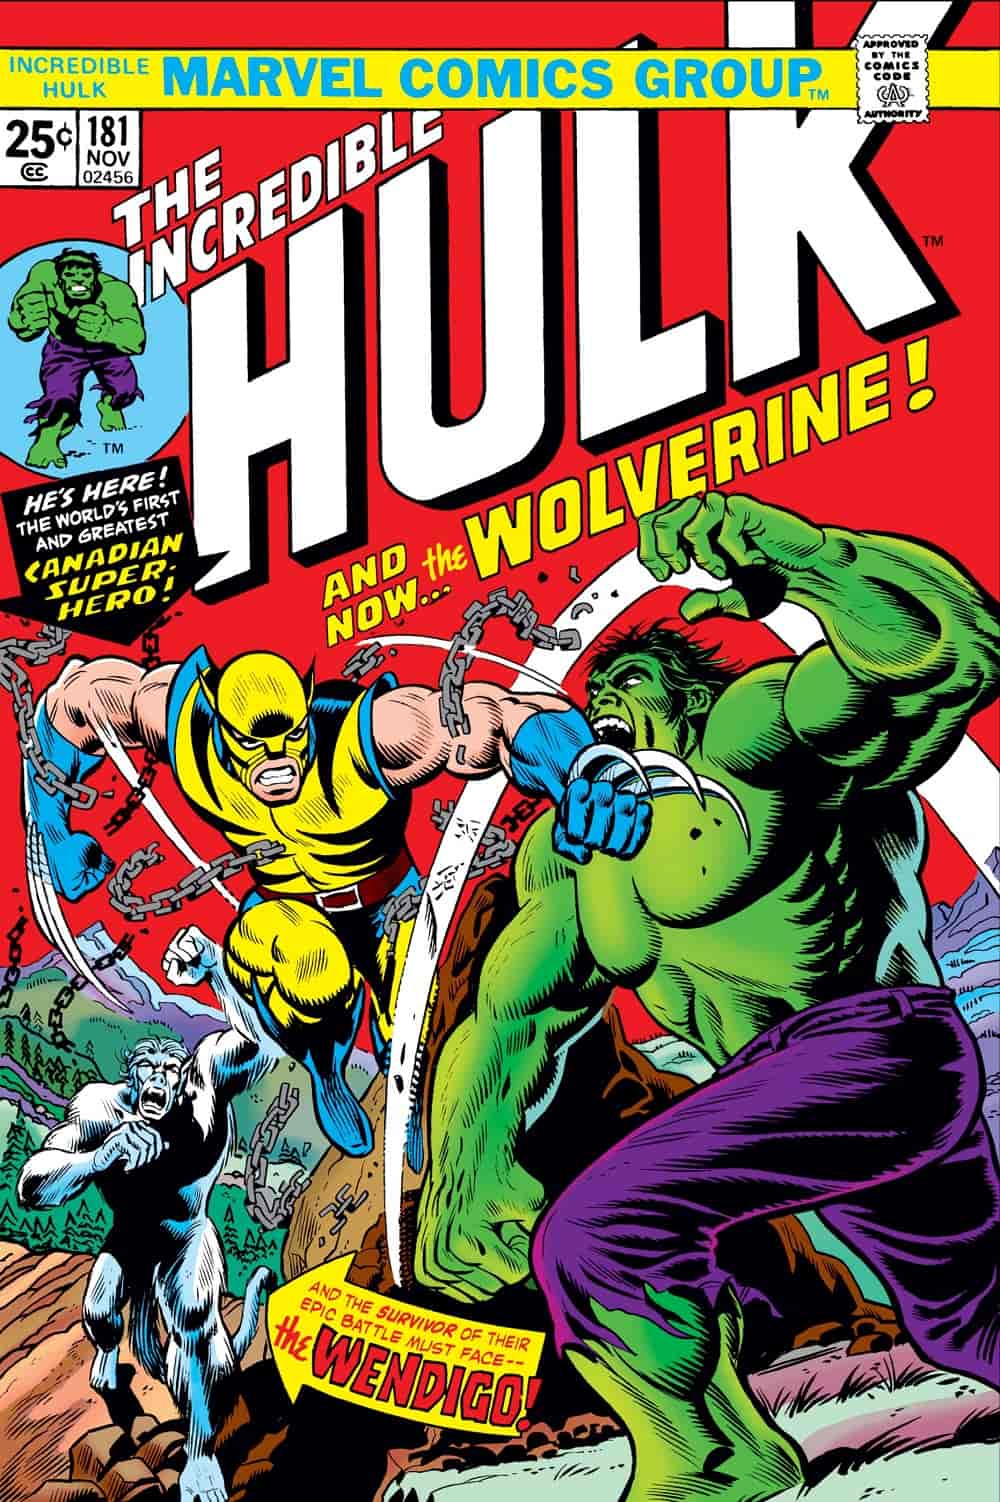 Wolverine was first introduced in Hulk comics